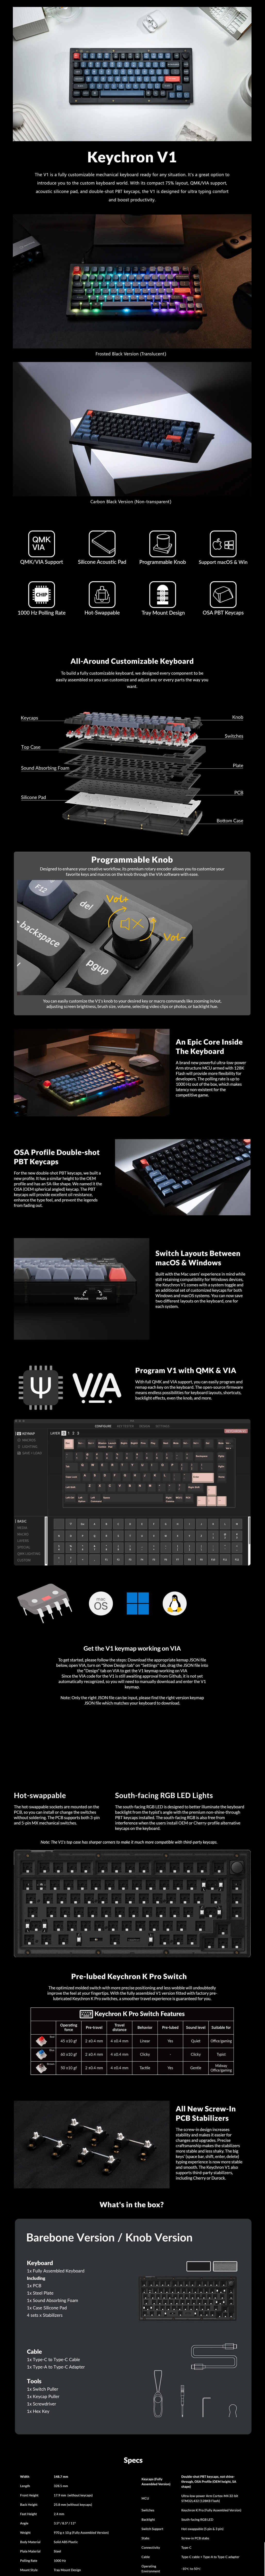 A large marketing image providing additional information about the product Keychron V1 RGB 75% Mechanical Keyboard - Frosted Transparent Black (Barebones) - Additional alt info not provided